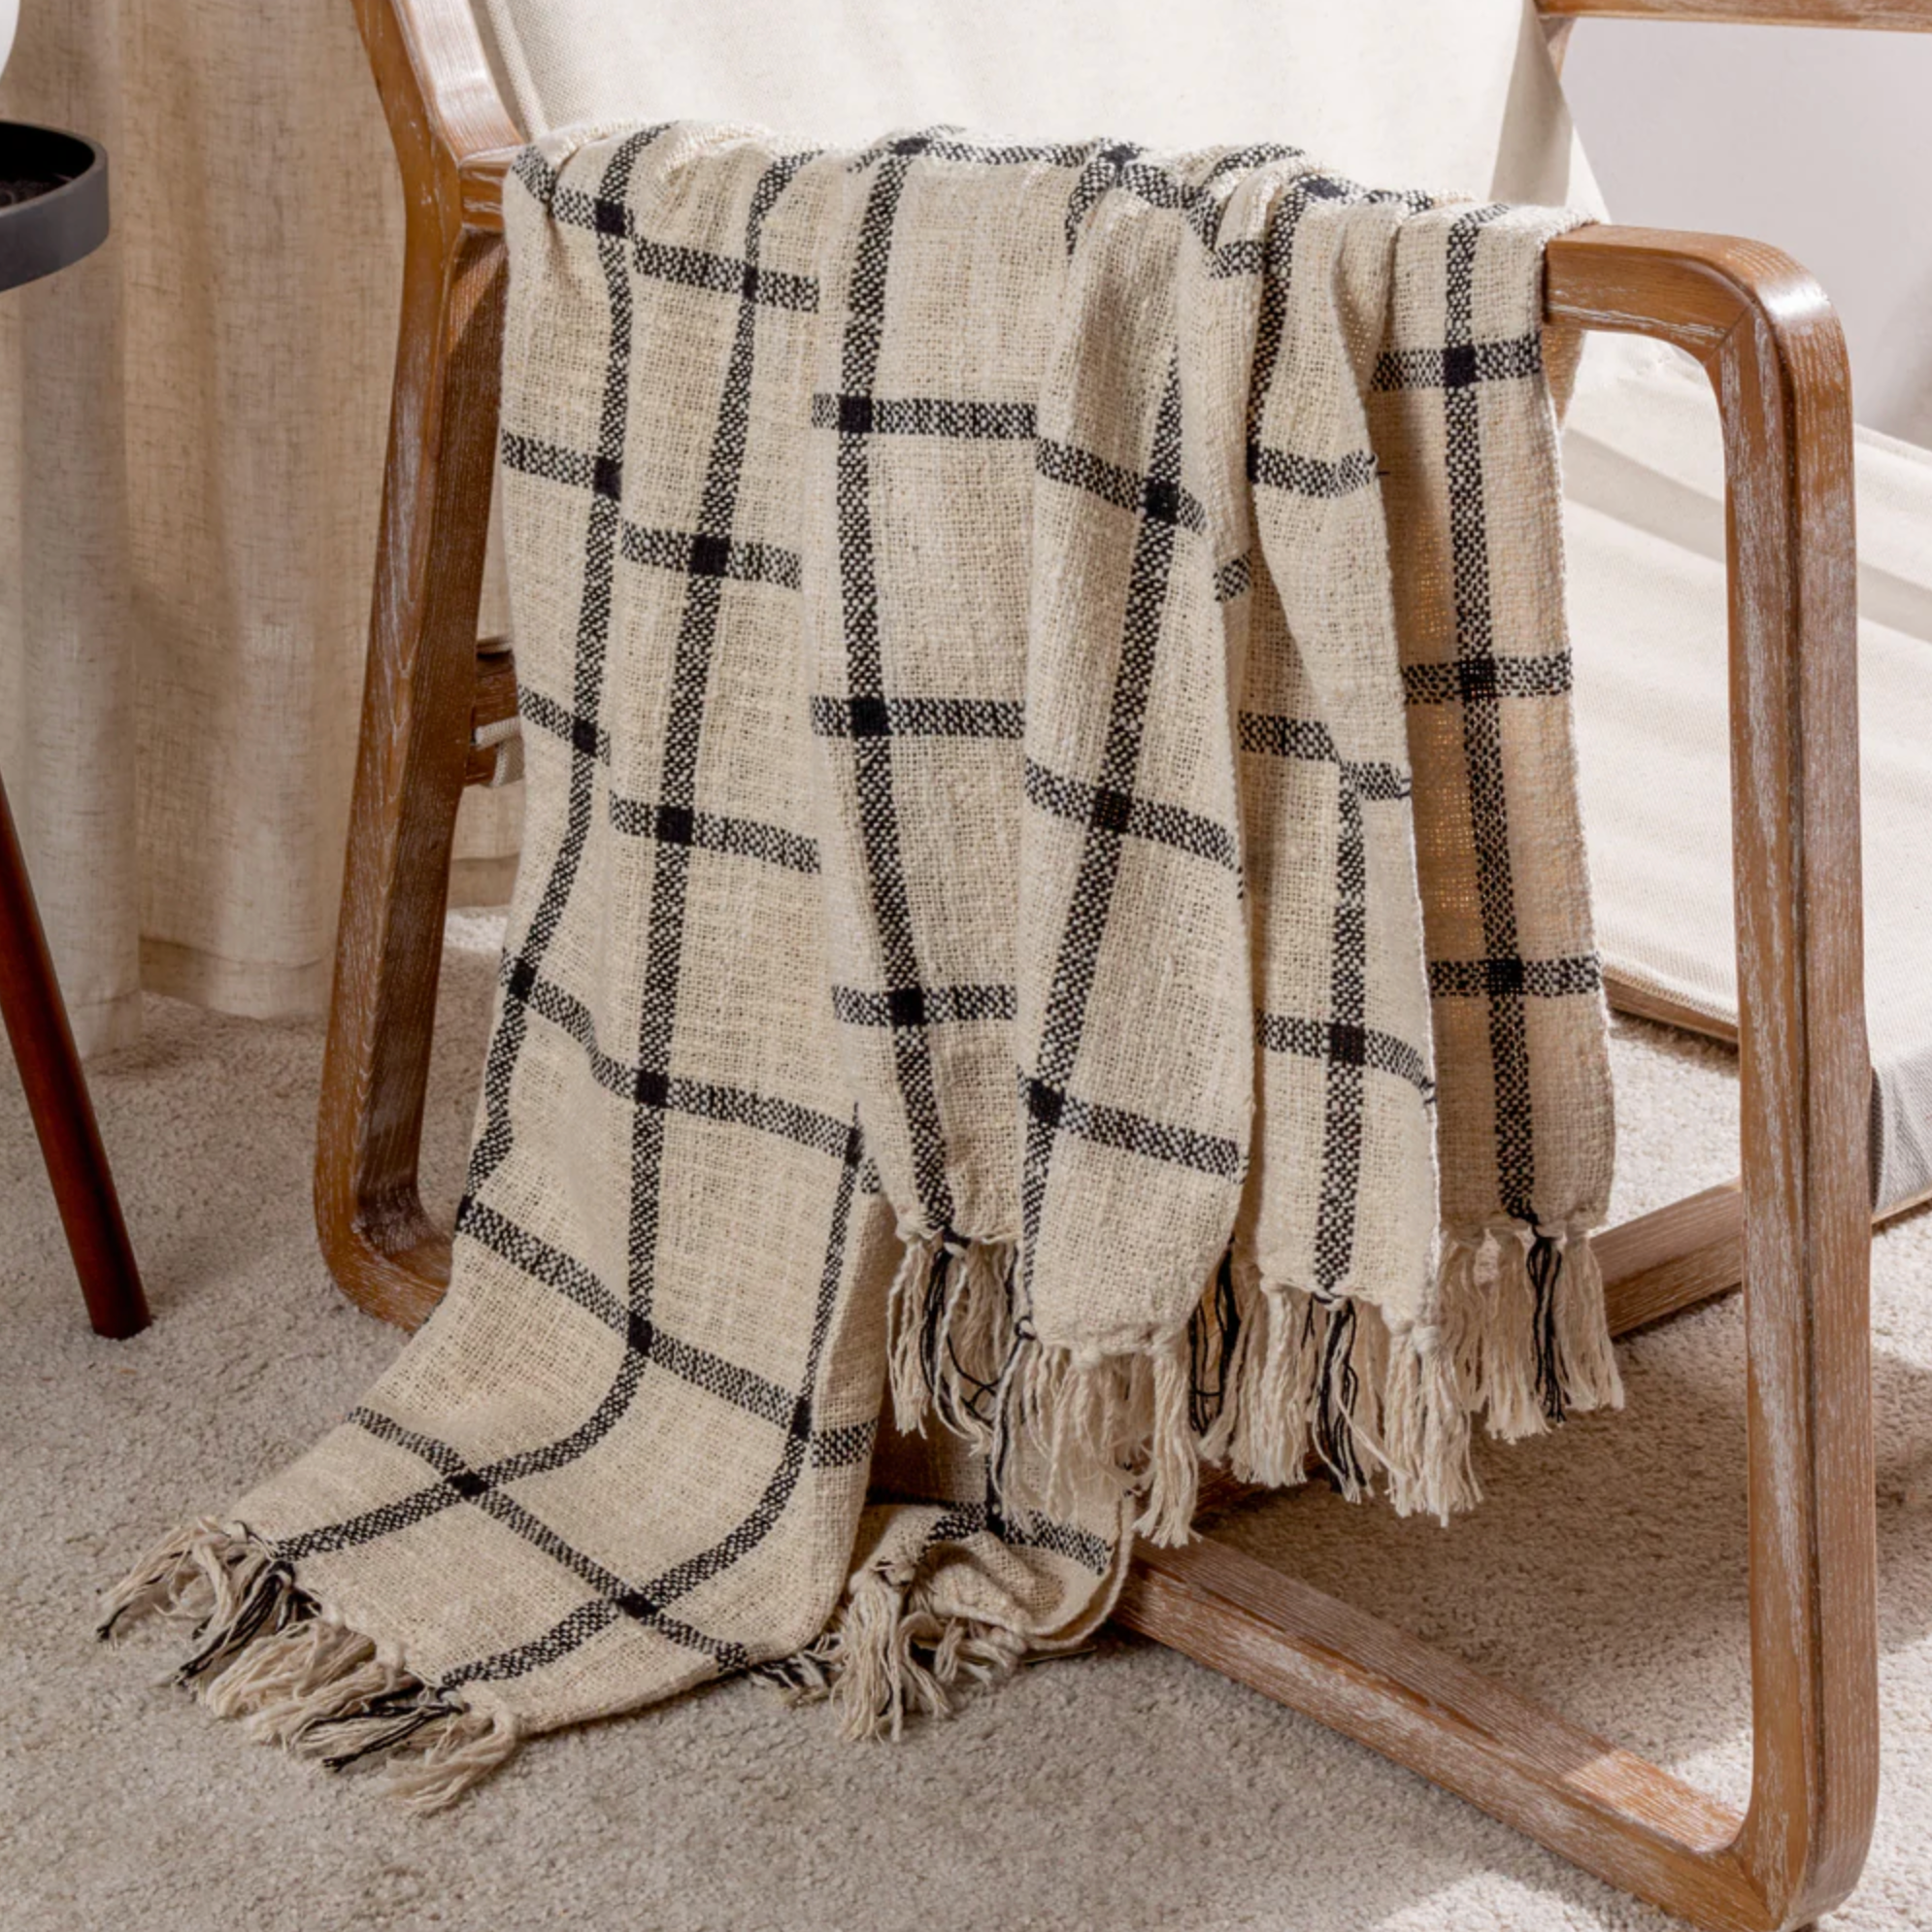 Checked Cotton Throw Blanket draped over an armchair.